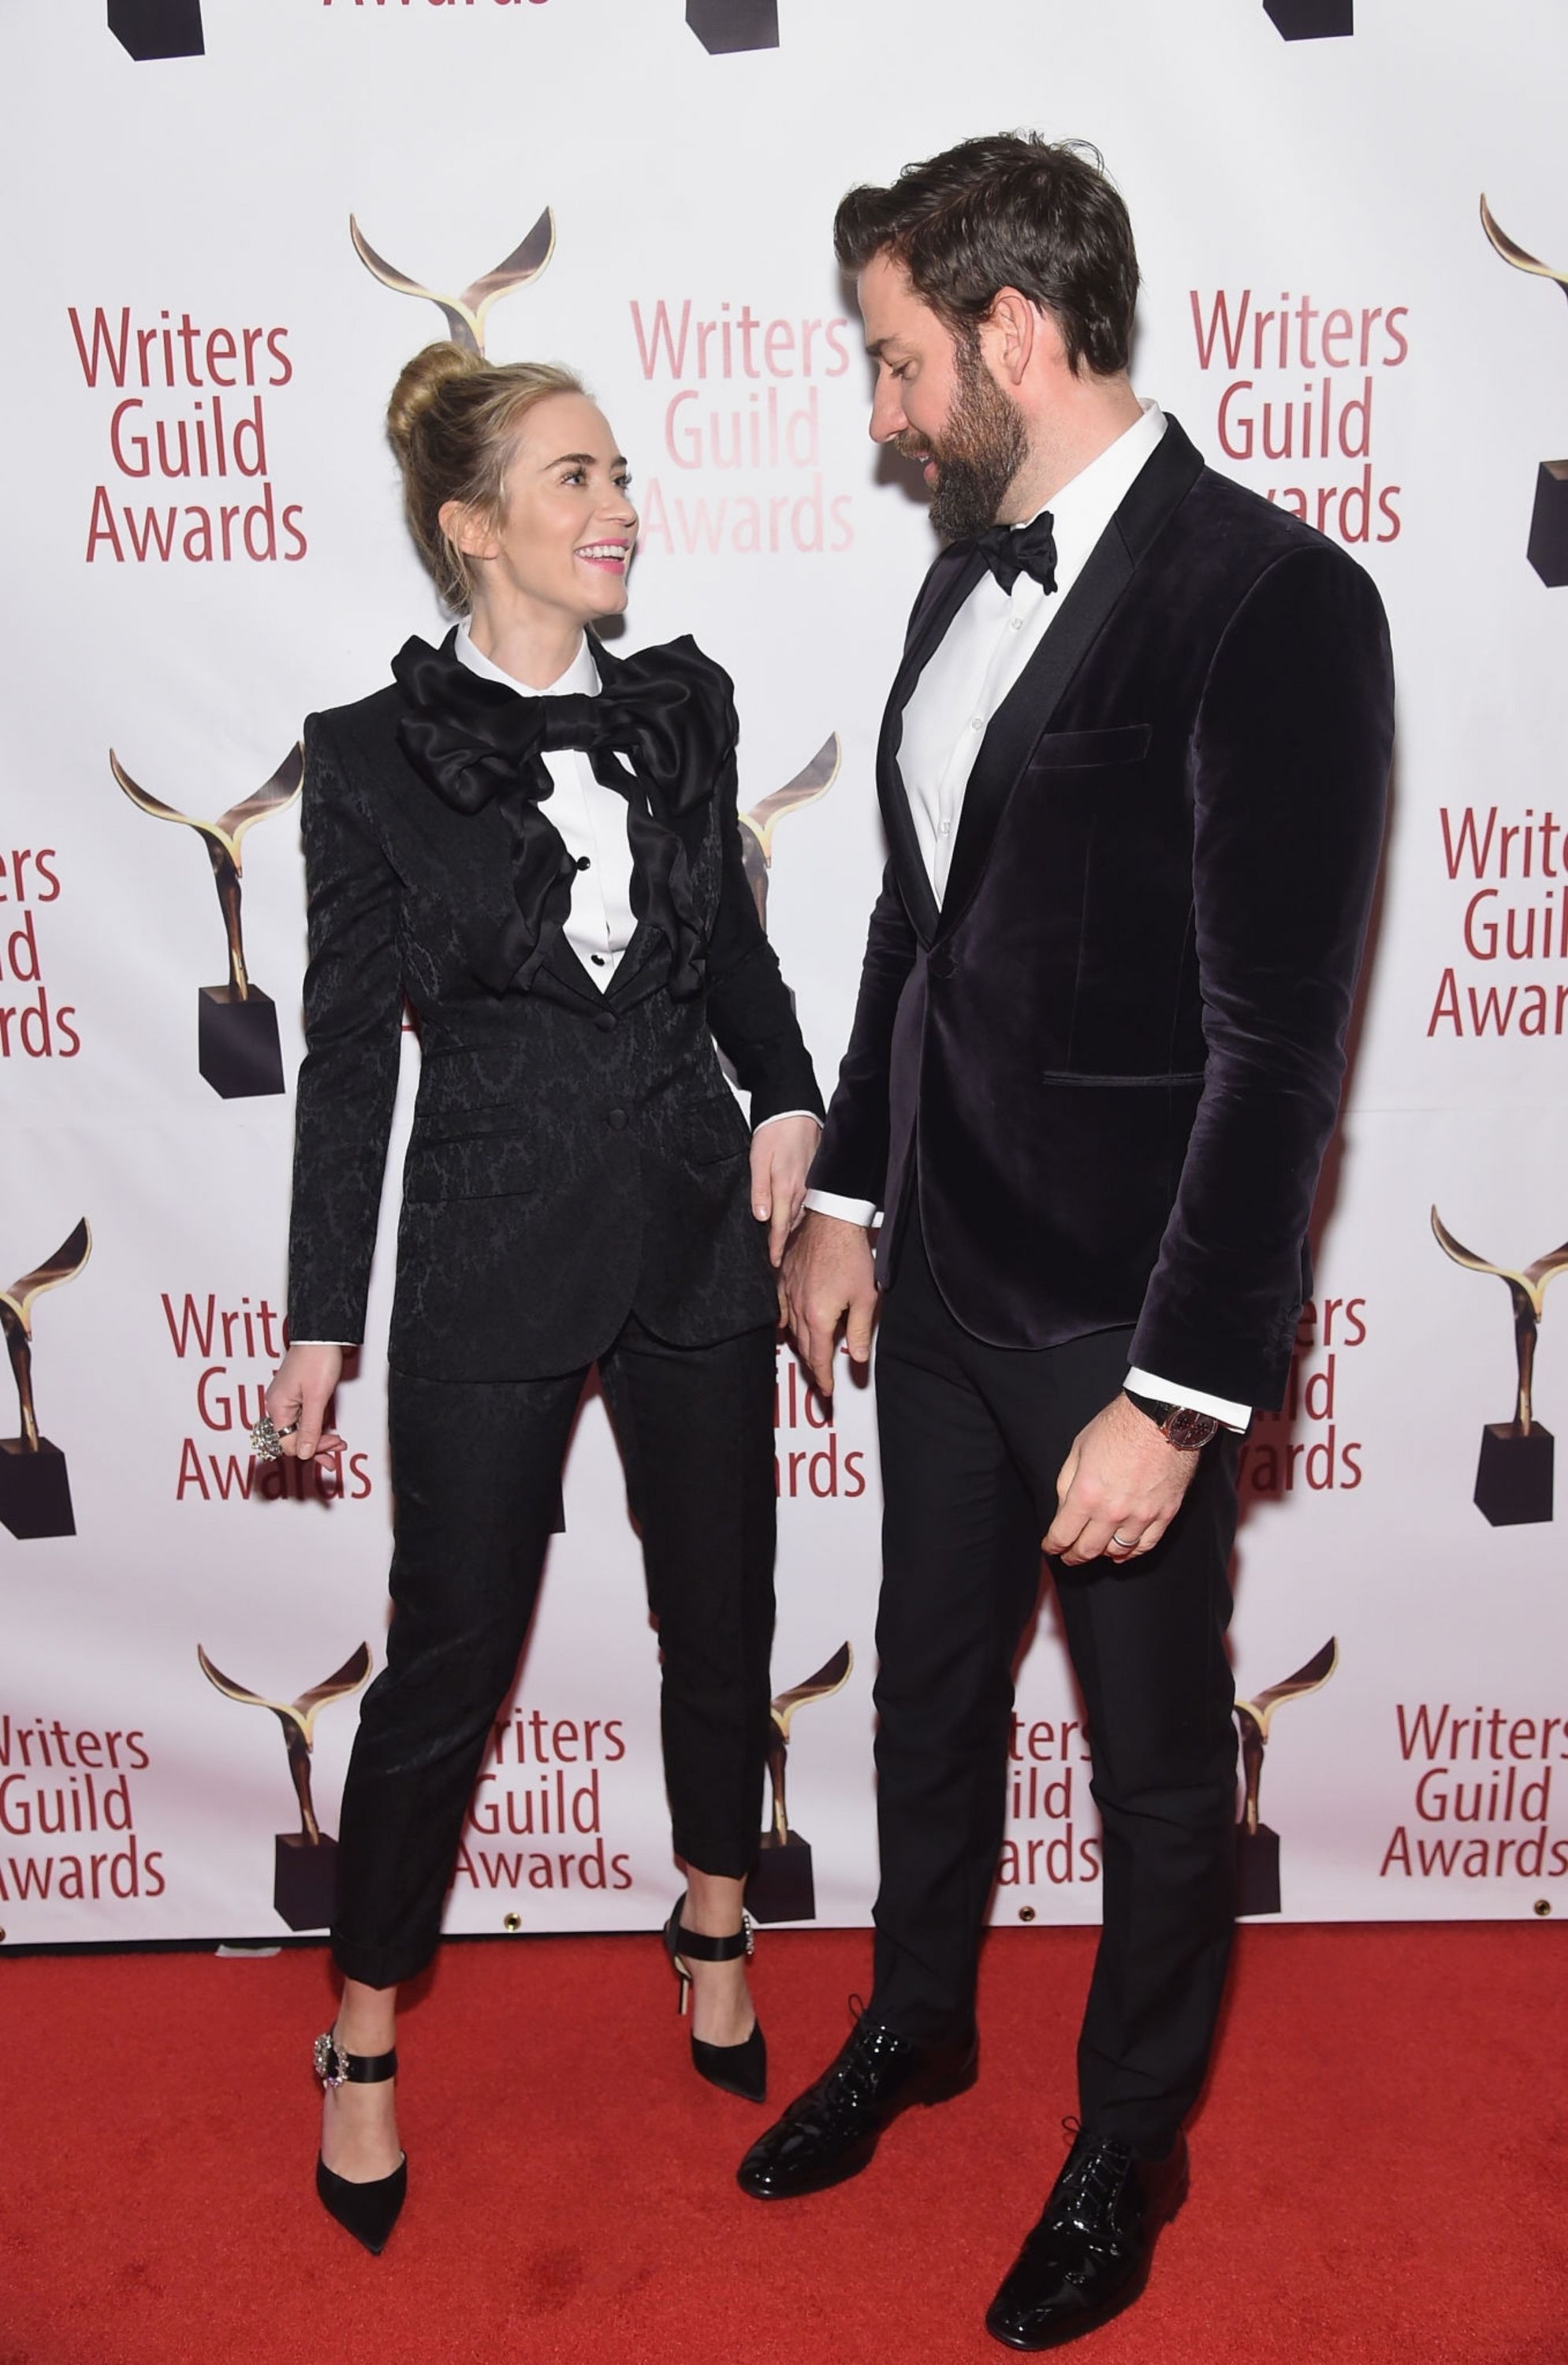 2019-02-17-71st-Annual-Writers-Guild-Awards-018.jpg